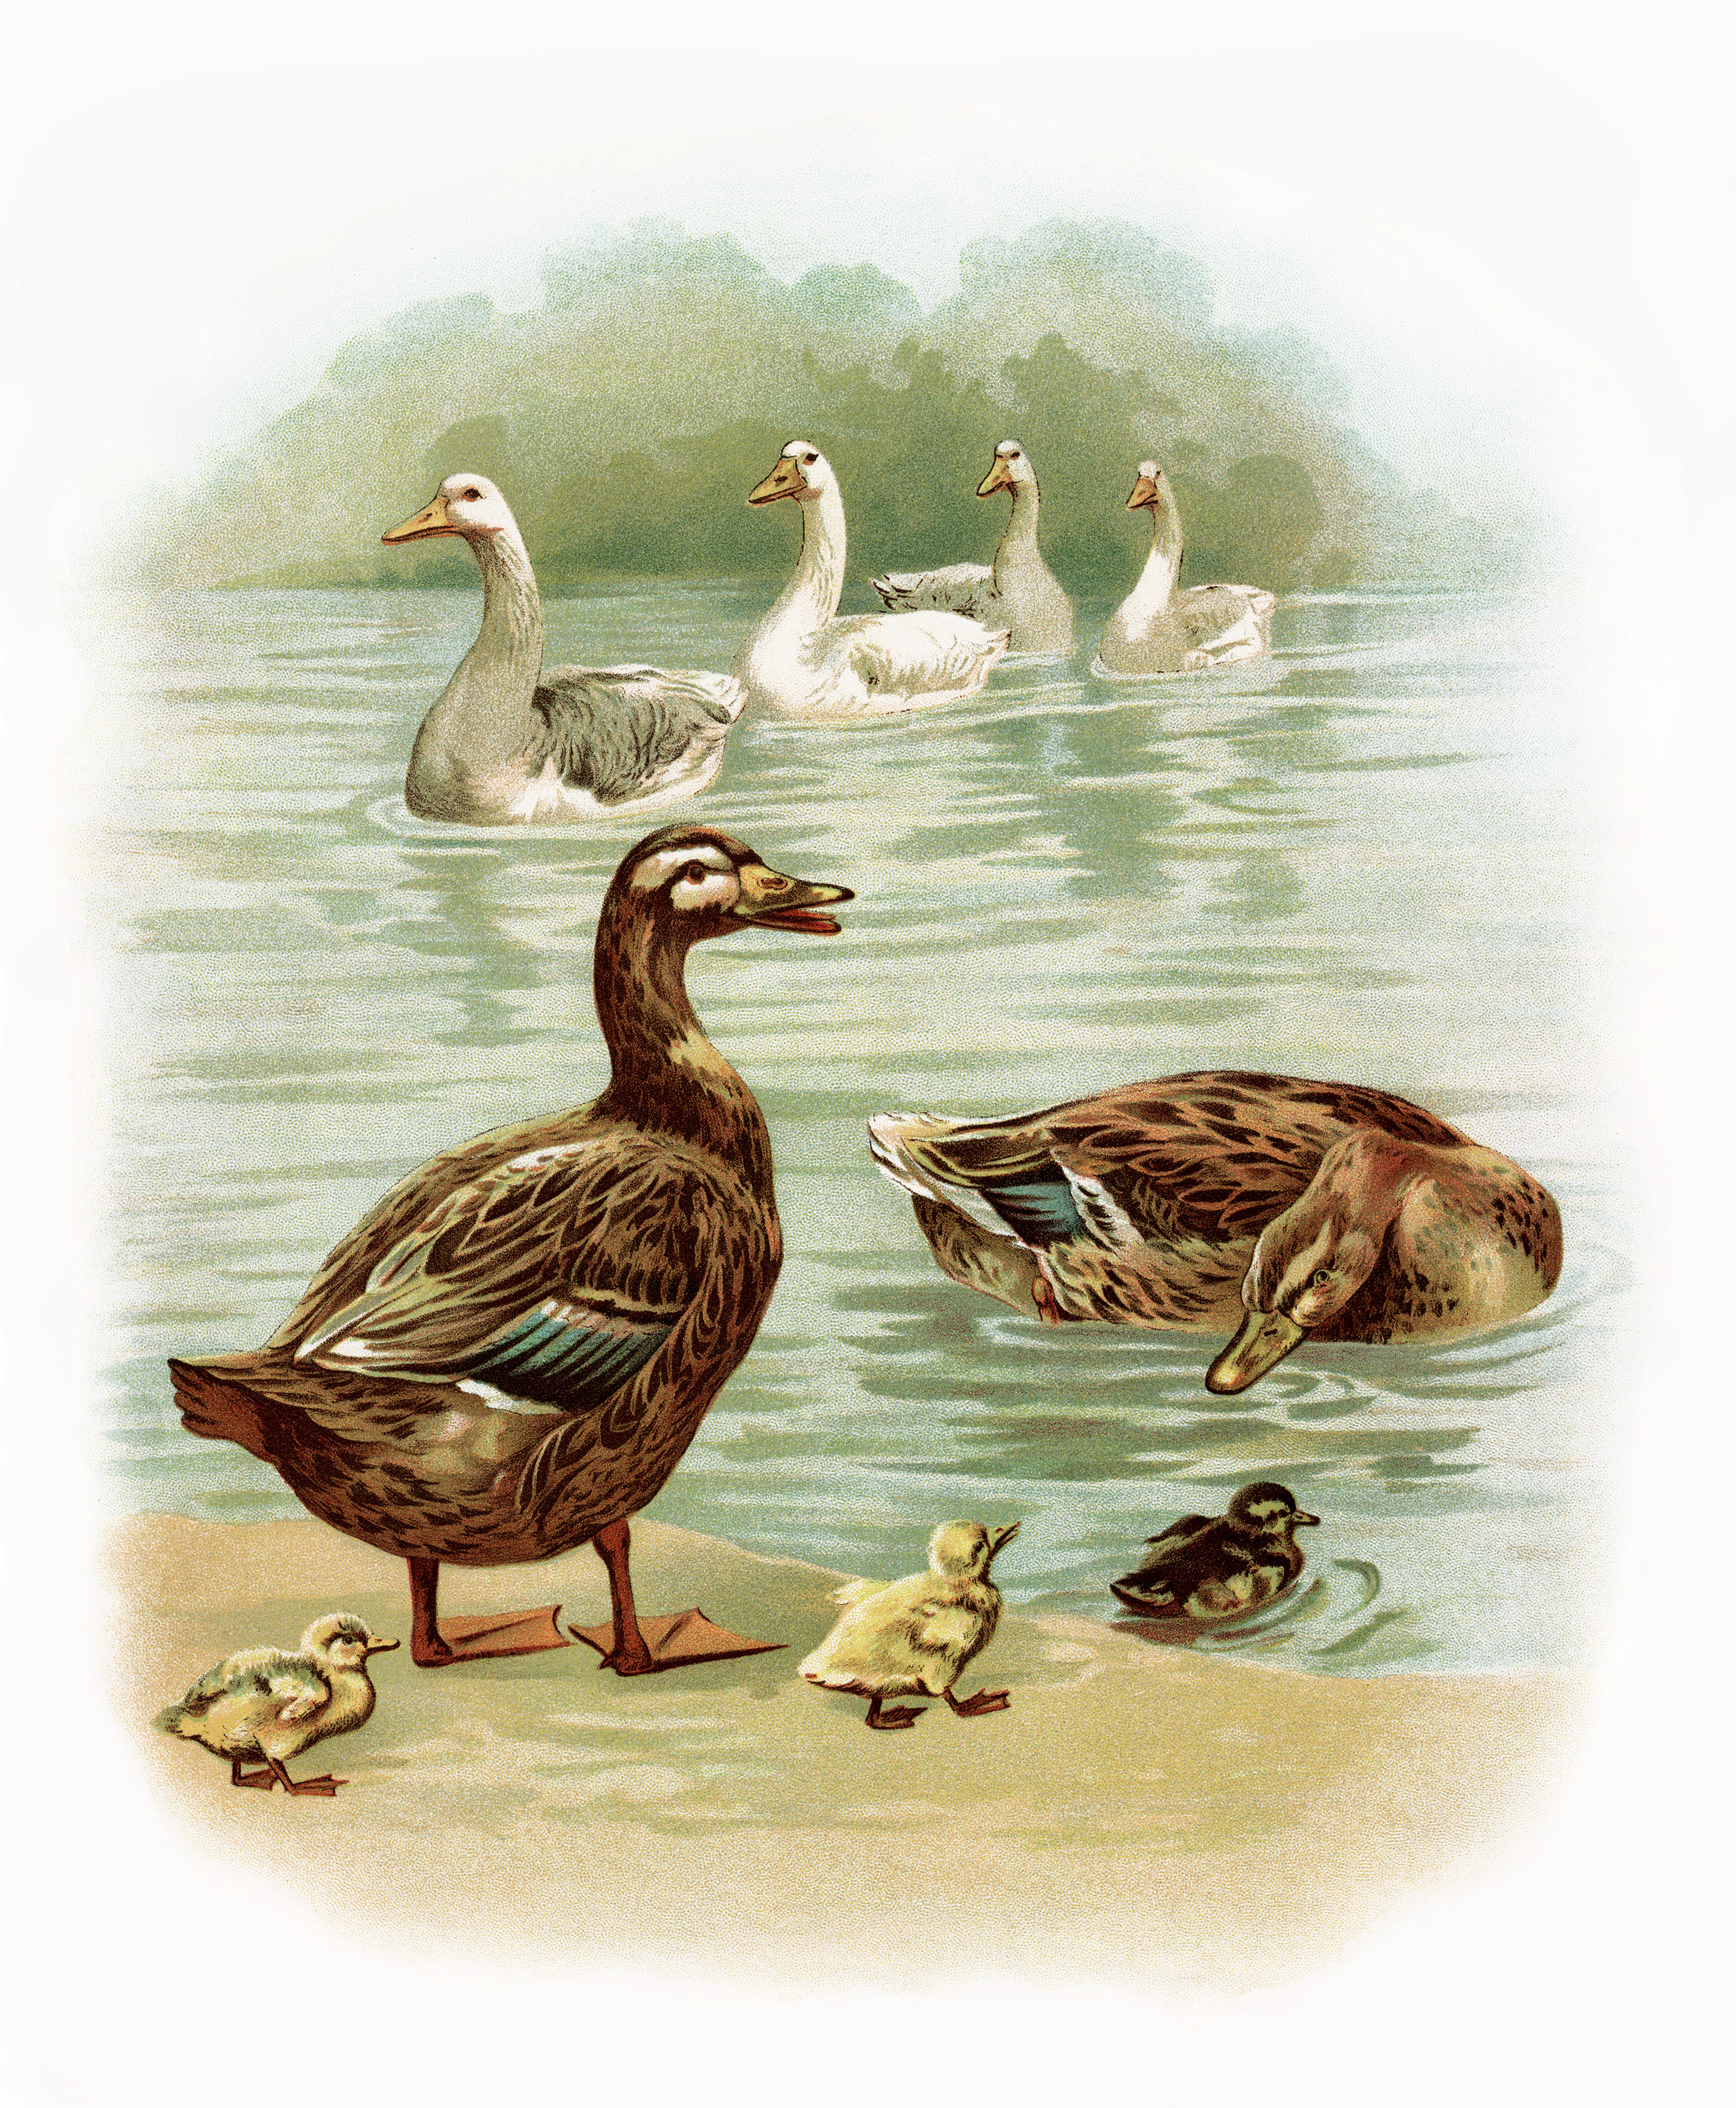 geese, duck, duckling illustration, farm animals image, antique storybook page, digital goose duck graphic, birds in water vintage clipart